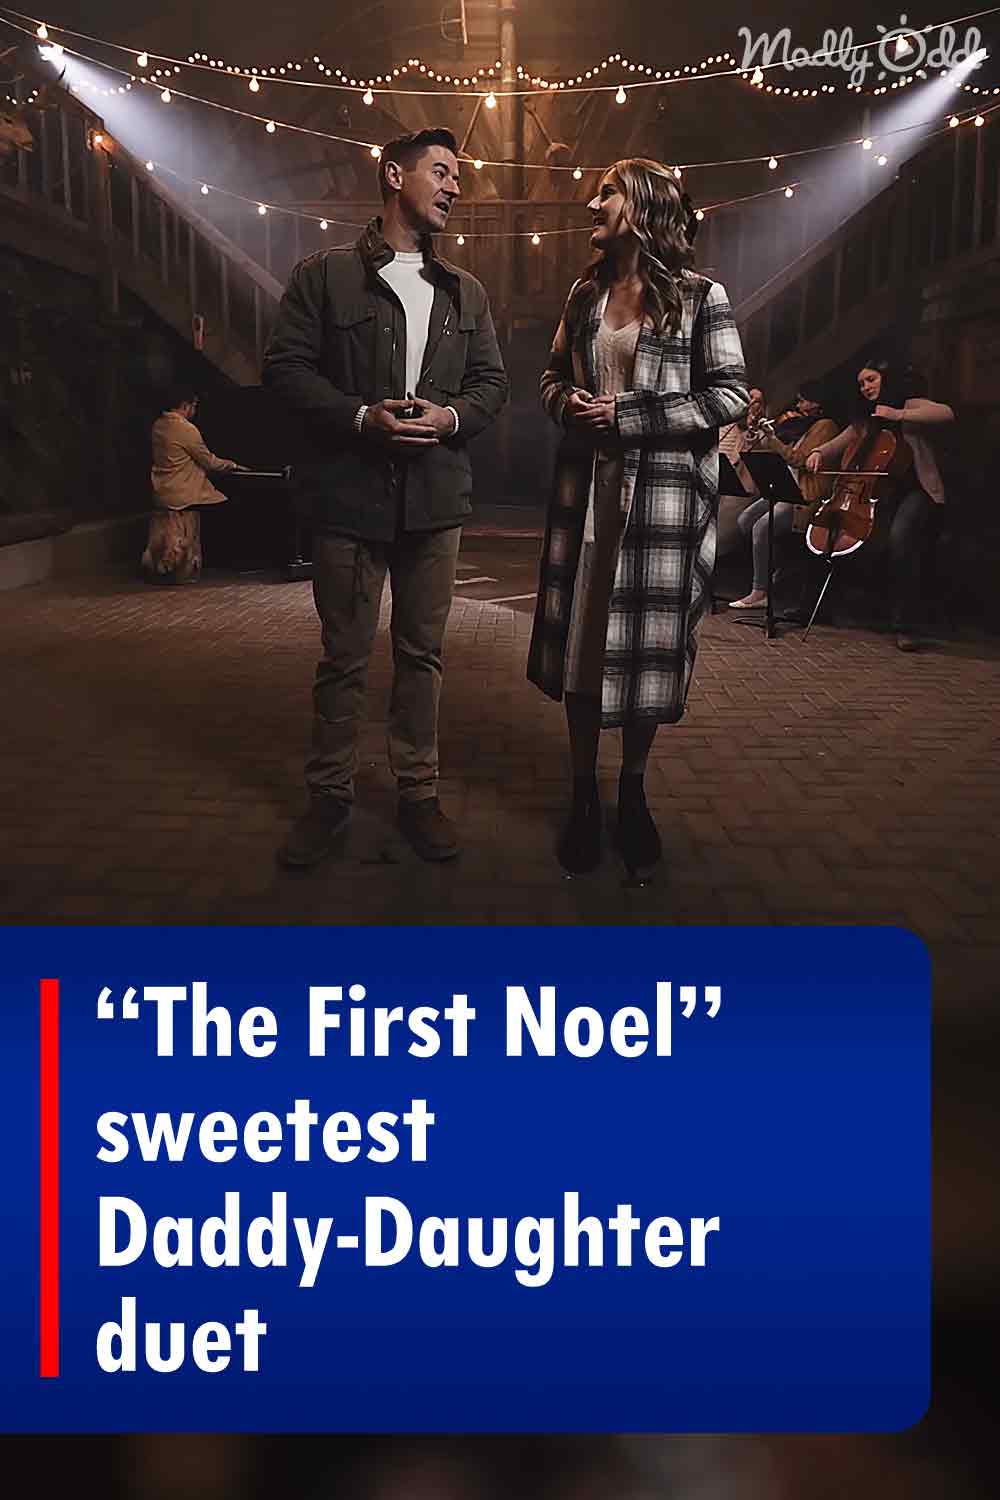 “The First Noel” sweetest Daddy-Daughter duet